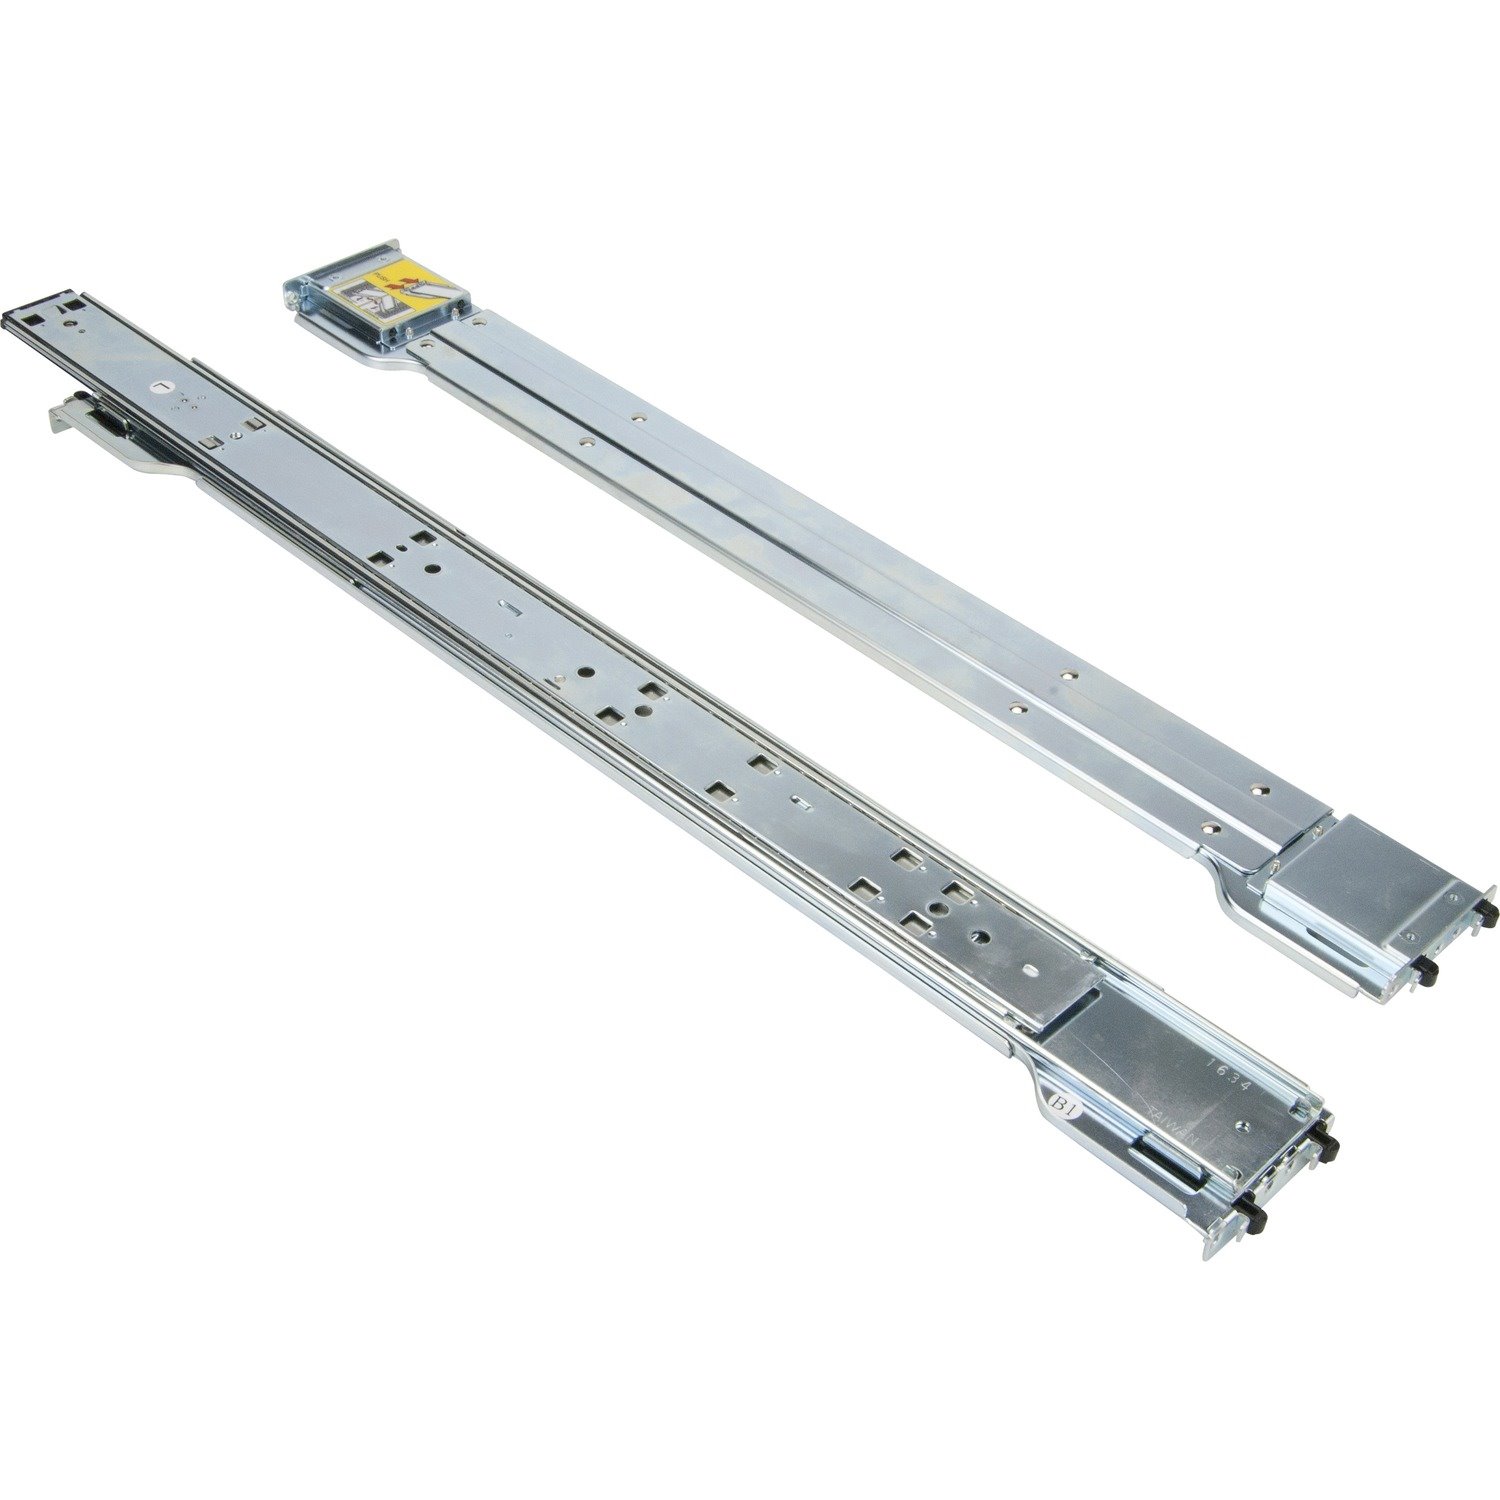 Supermicro Mounting Bracket for Chassis